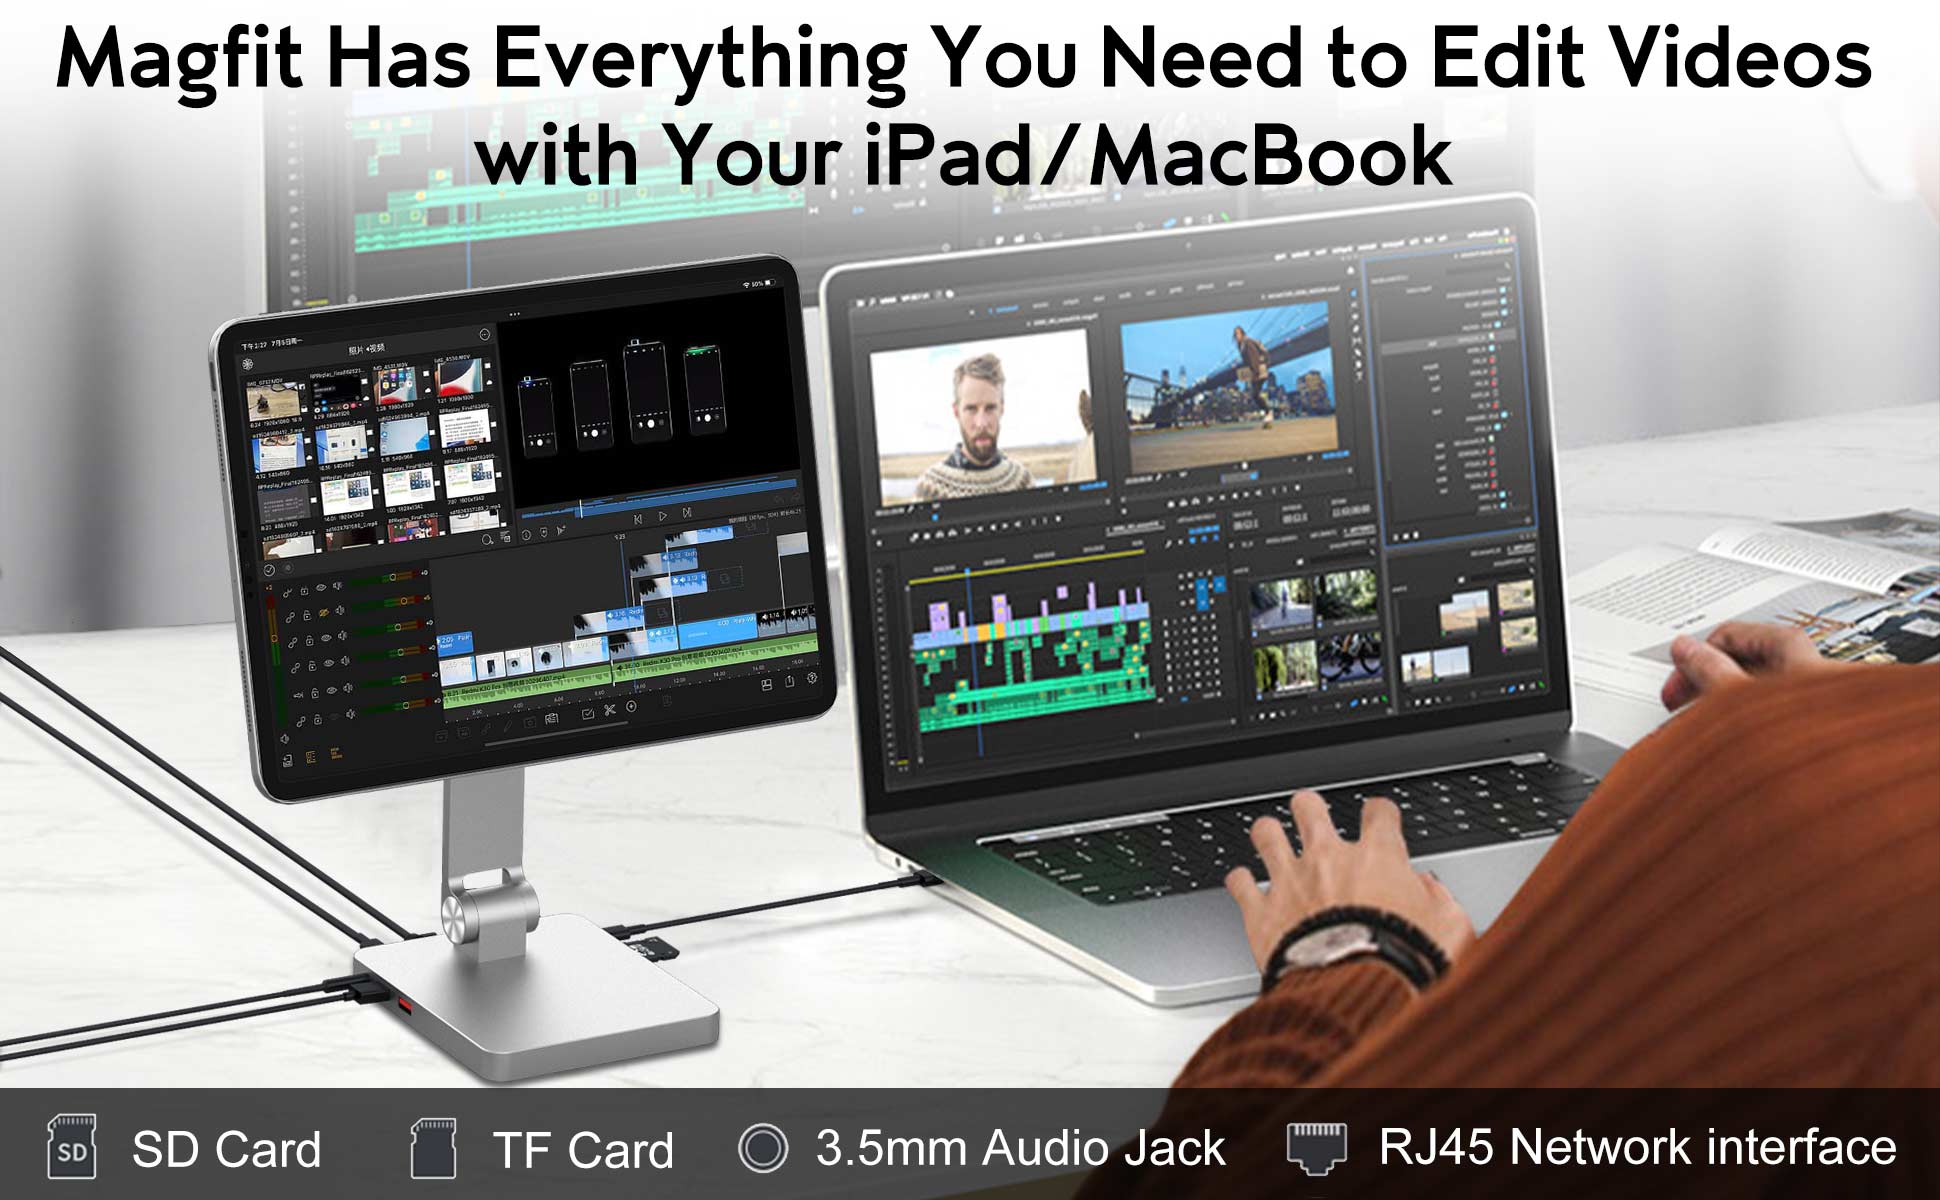 Ipad-dock-powerful-features-make-it-easy-to-do-video-editing-photo-manipulation-and-more